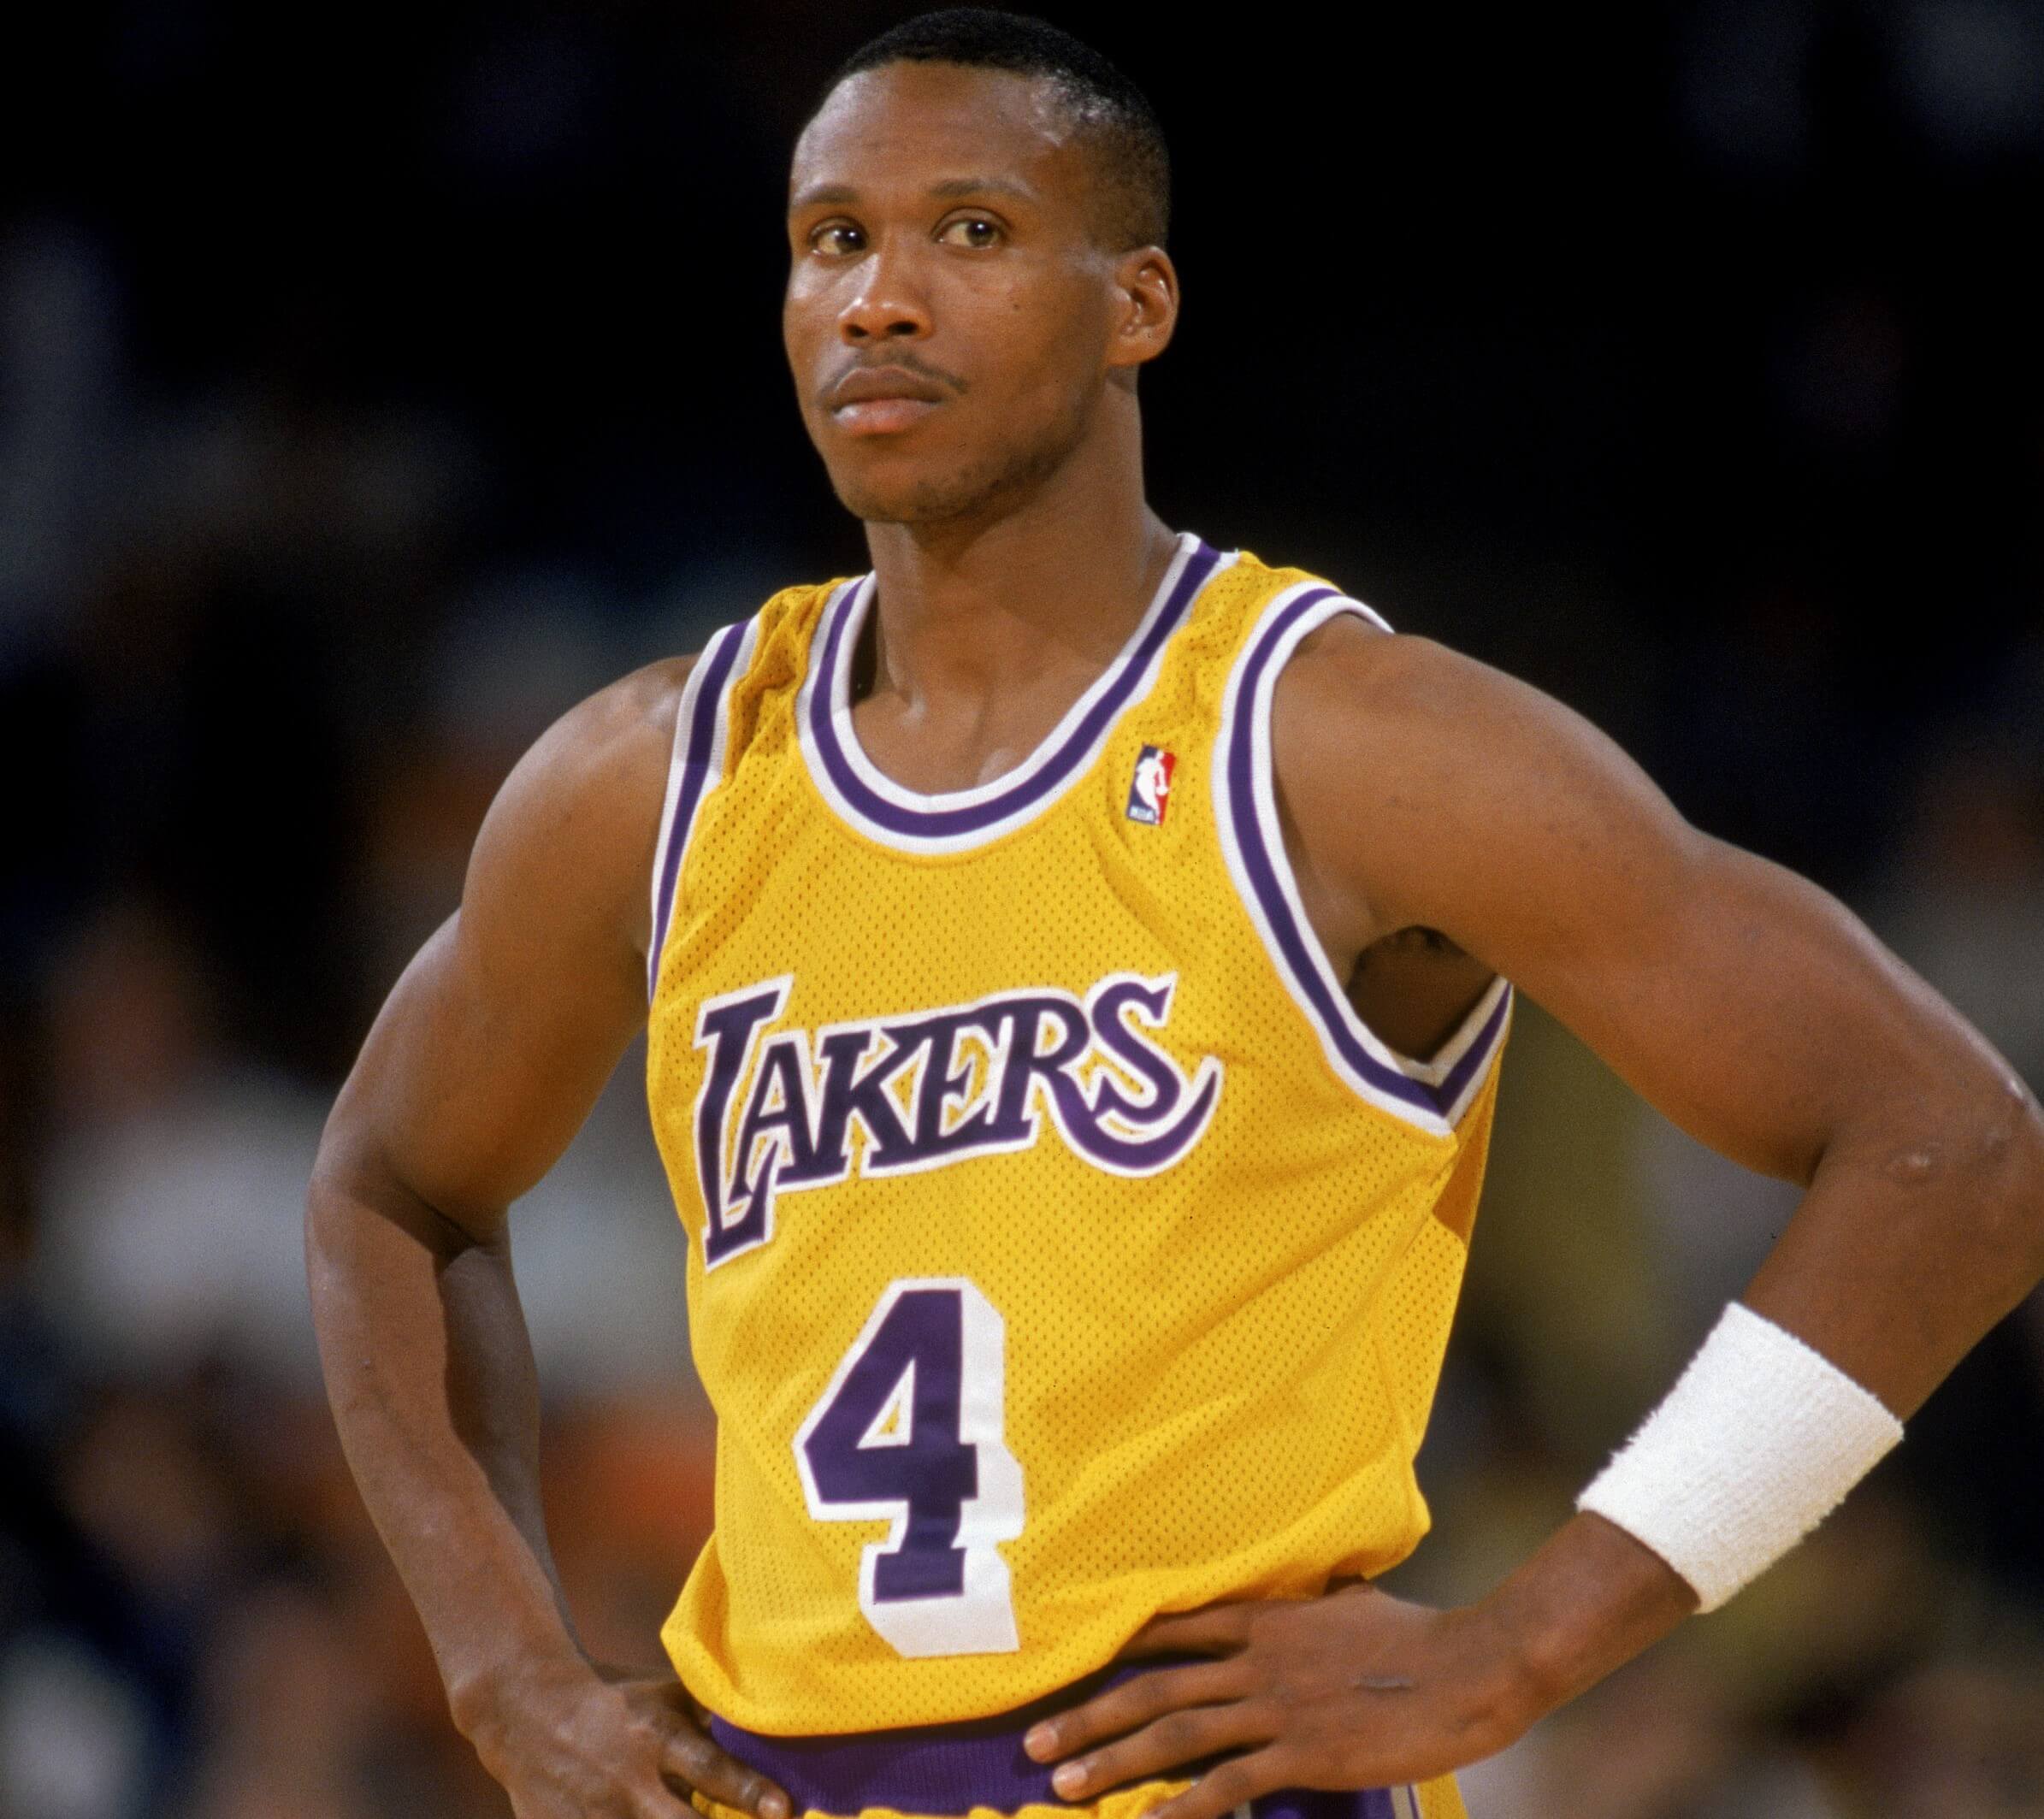 Byron Scott of the Los Angeles Lakers stands on the court.